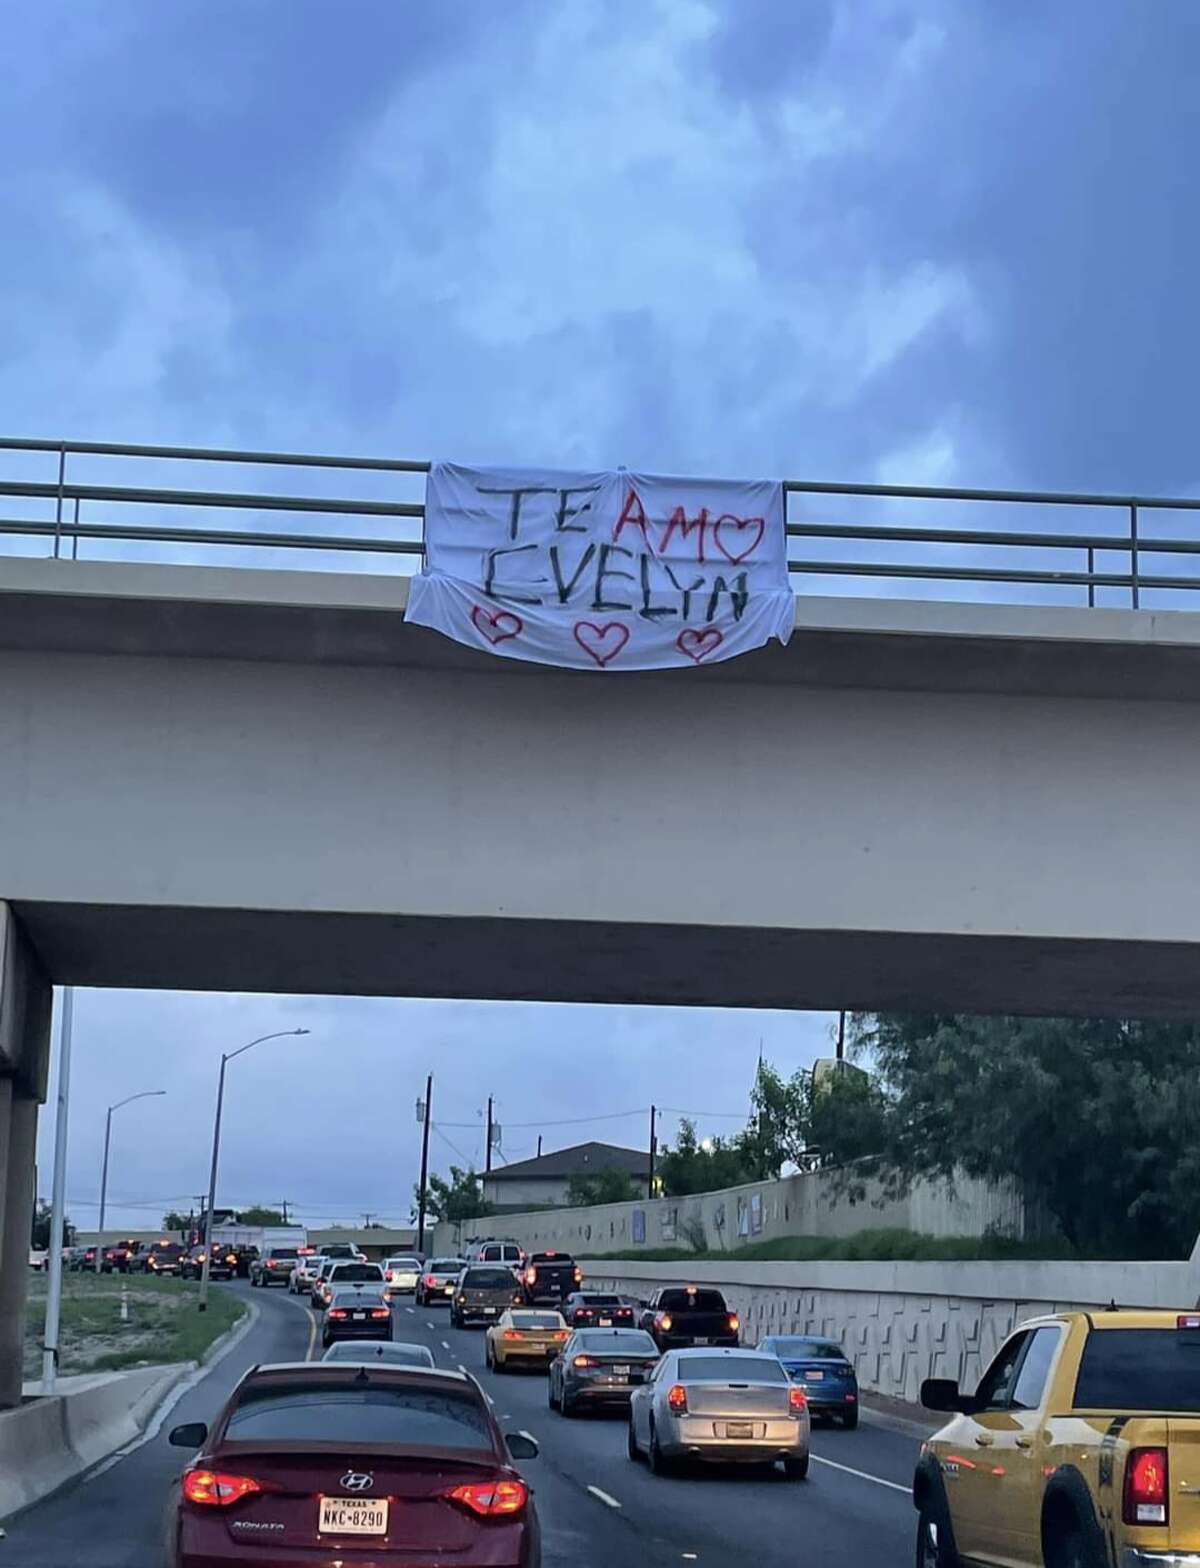 Banner in busy Guadalupe St. that appeared on the morning of Thursday, Aug. 25, 2022. The banner reads "Te AMo Evelyn", or "I Love You Evelyn" in Englush.